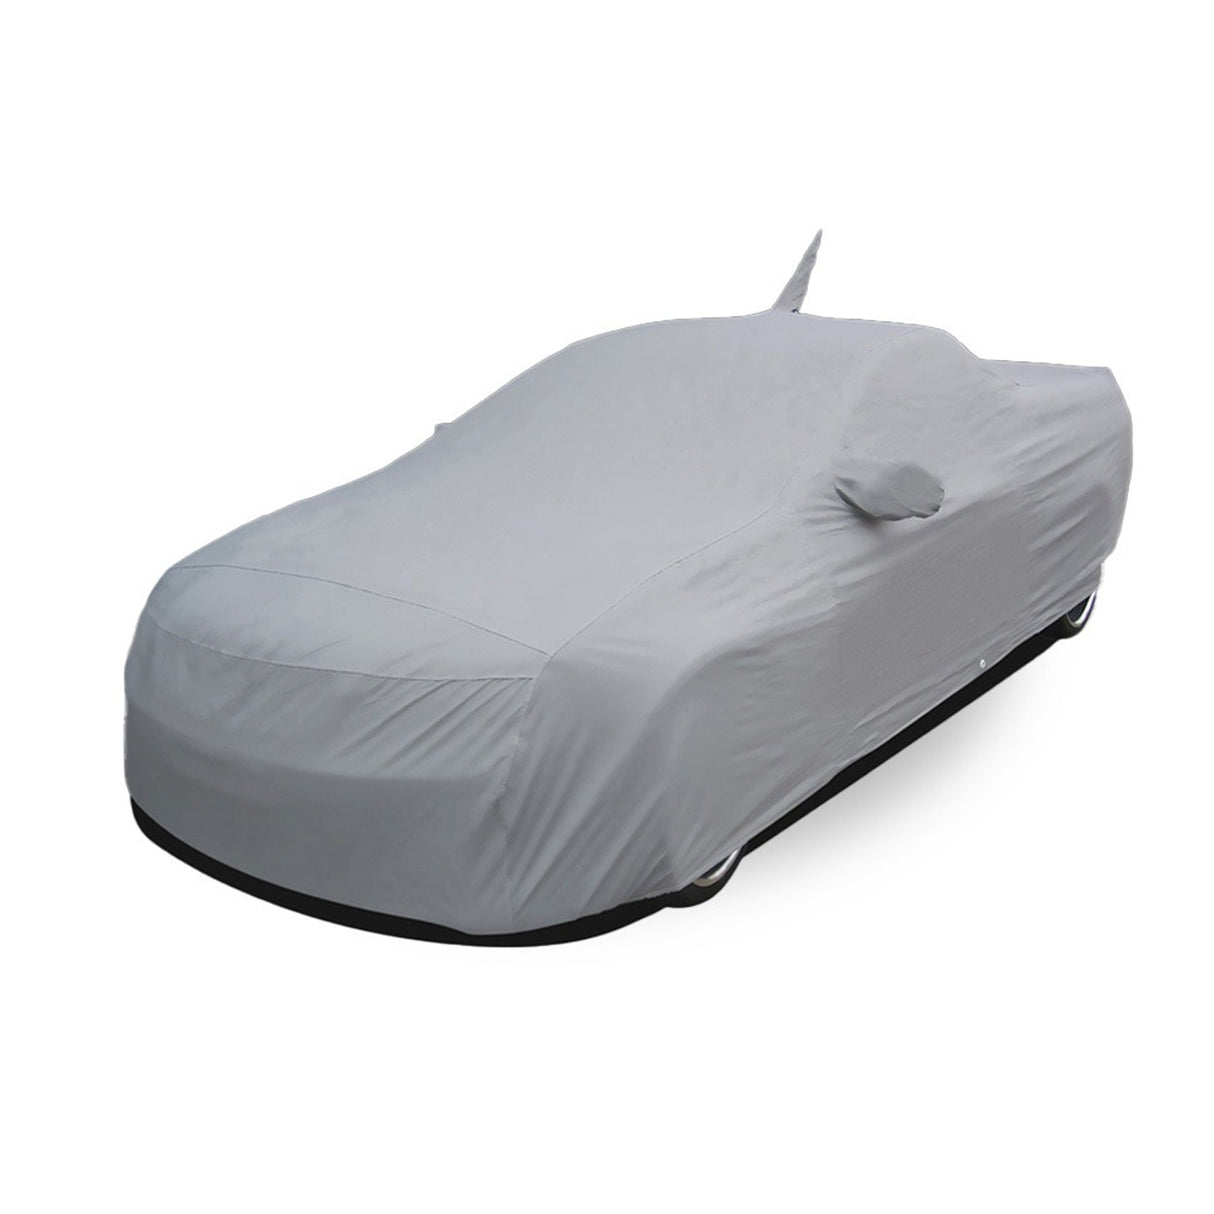 1997-2000 HSV Clubsport VT Sedan with wing   2 mirrors EazyShield Custom Outdoor Cover